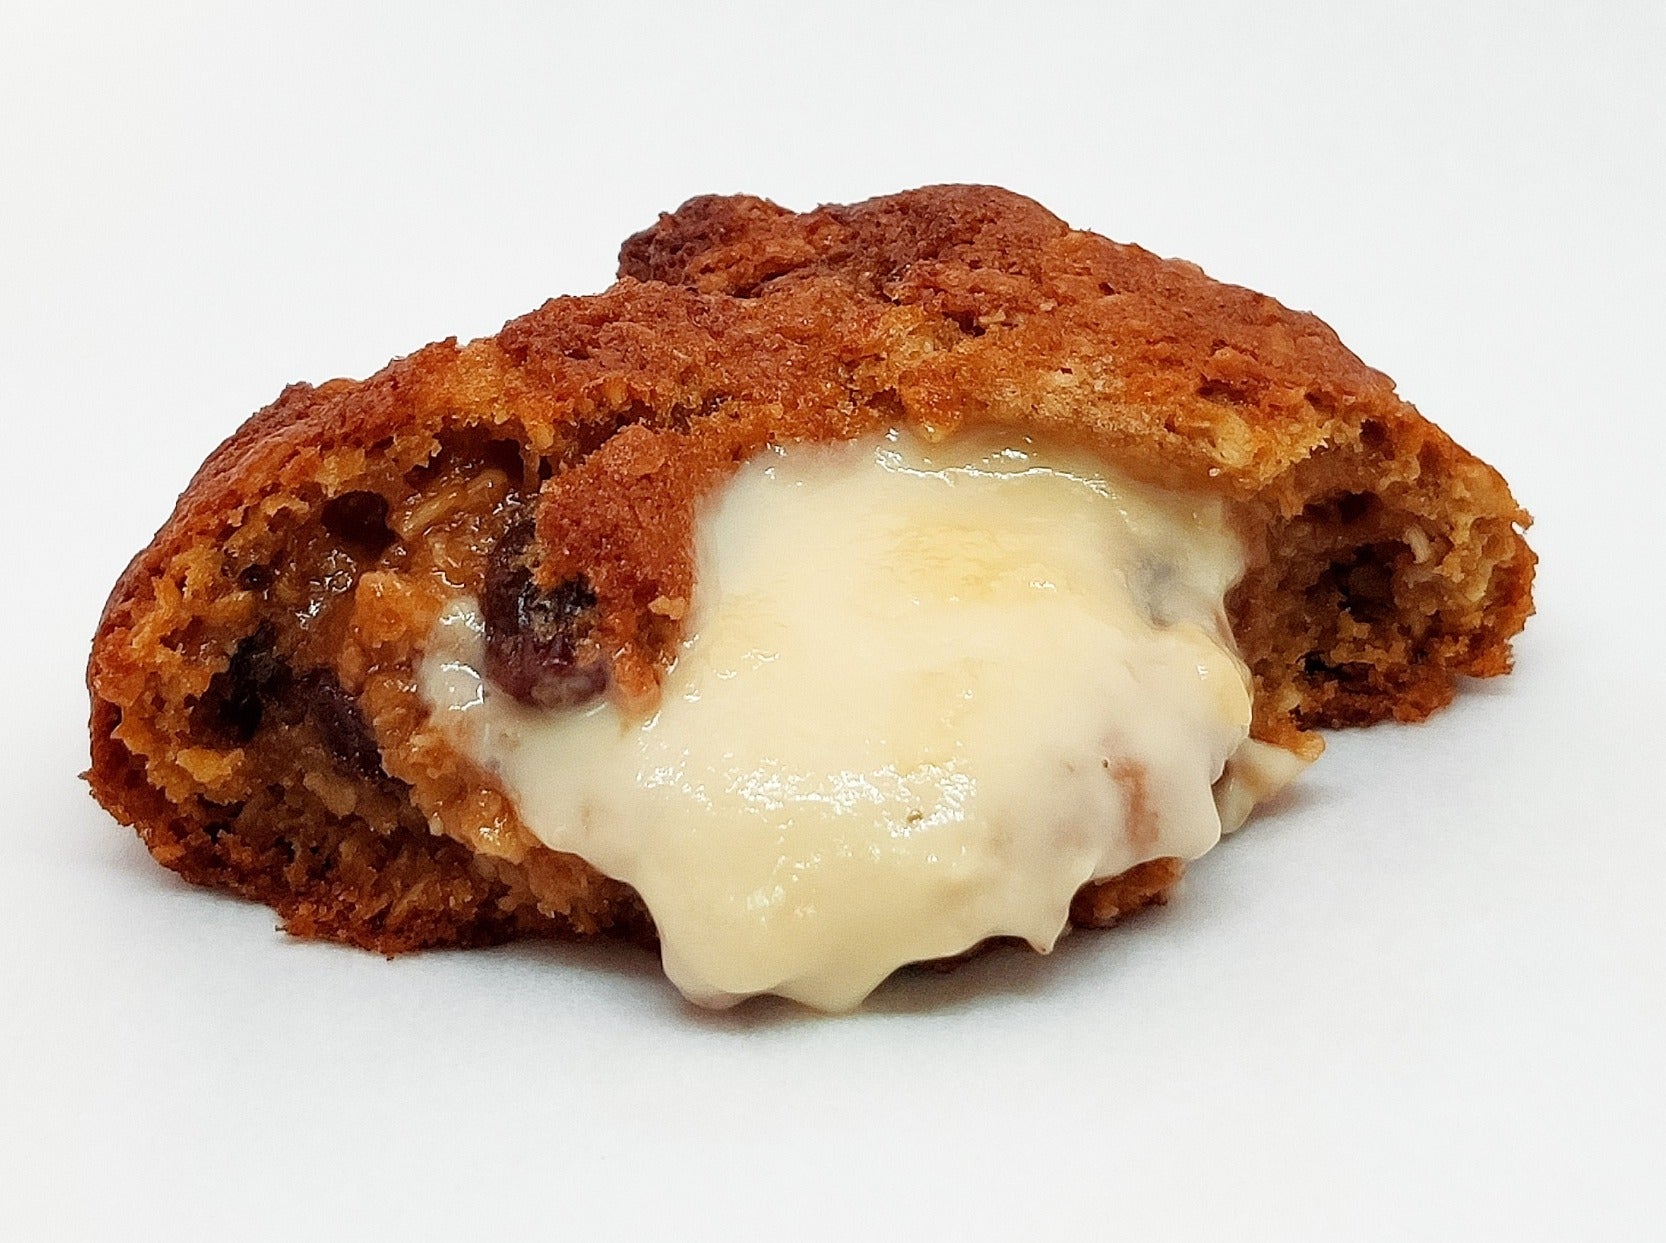 A smooth and creamy key lime pie filling sitting in the centre of a classic oatmeal raisin cookie. Those who think cookies are only good when there's chocolate chips, this will prove them wrong!